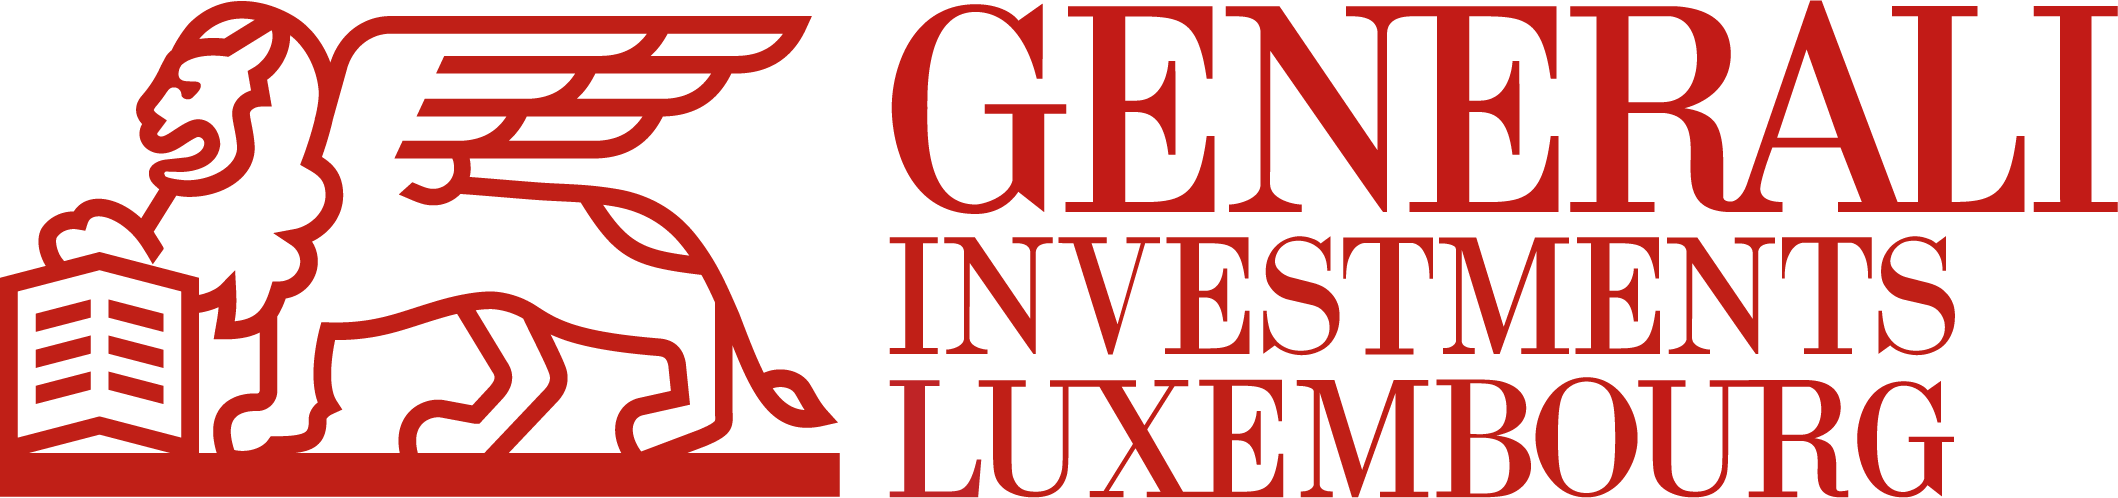 Generali Investments Luxembourg logo